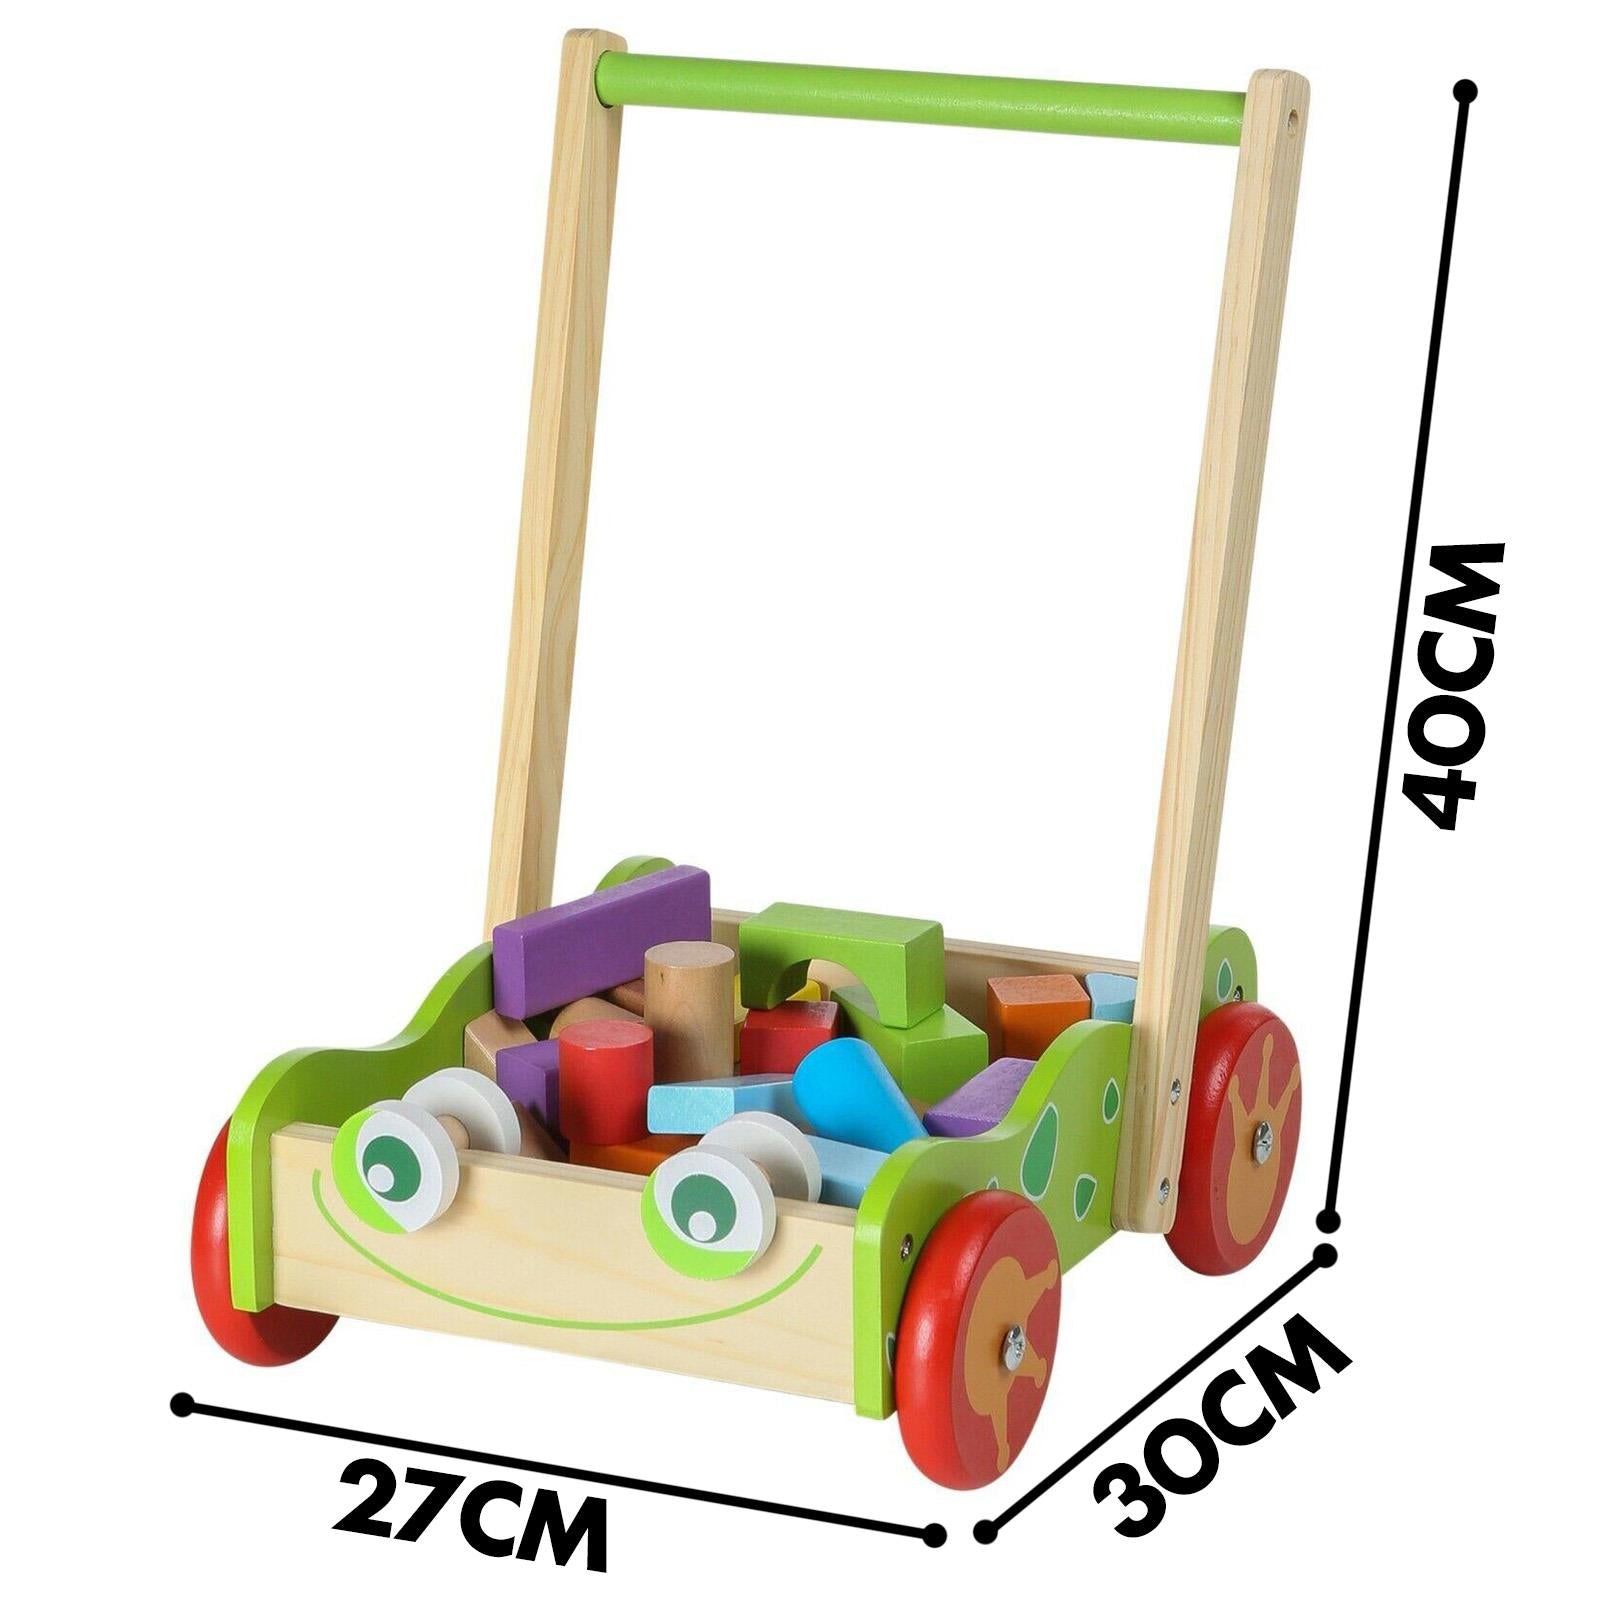 The Magic Toy Shop Toy Building Block Baby Wooden Walker and Building Bricks Set